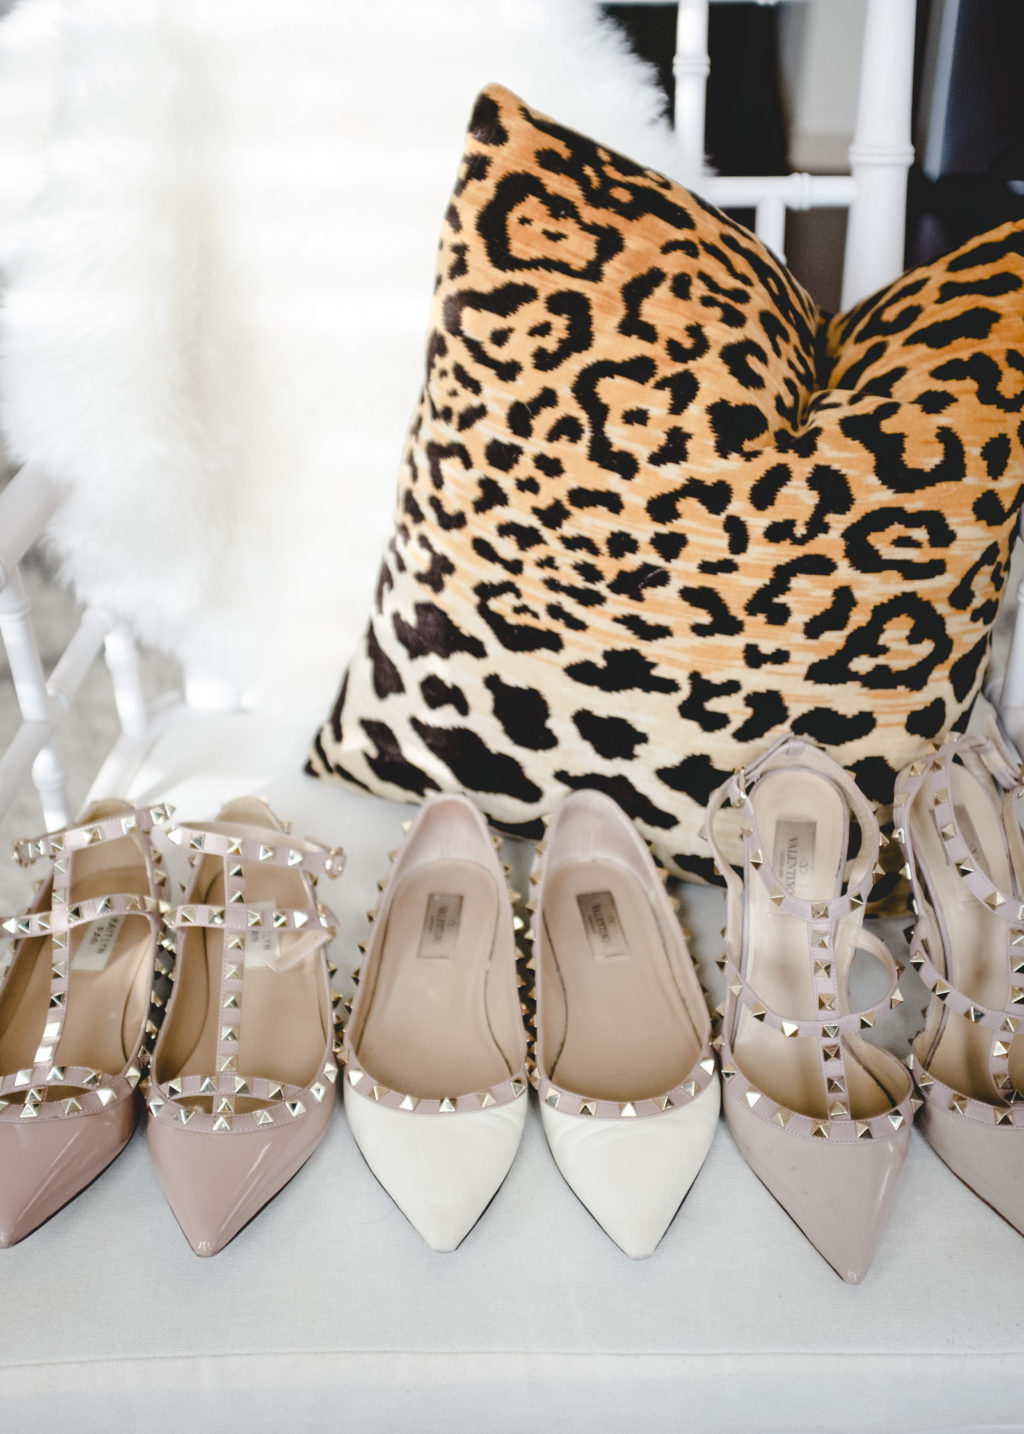 The Look for Less: Flats | The Diva: a Dallas Fashion Blog featuring Beauty & Lifestyle